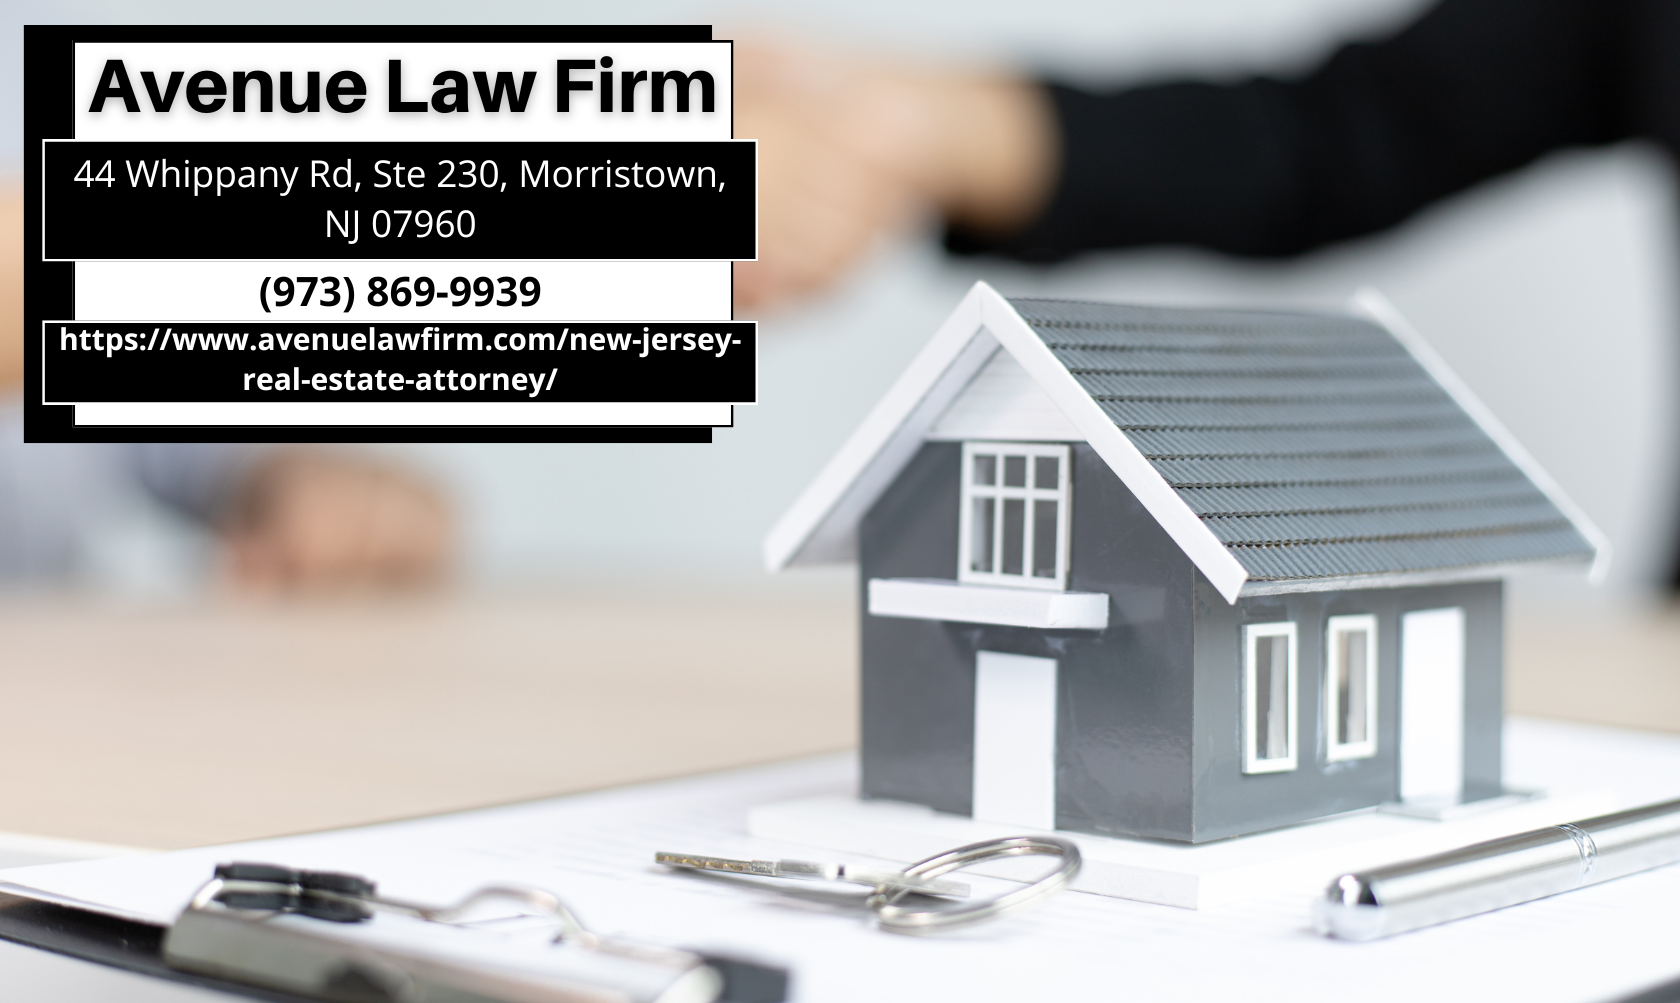 New Jersey Real Estate Lawyer Peter Zinkovetsky Releases Comprehensive Guide on Local Property Laws